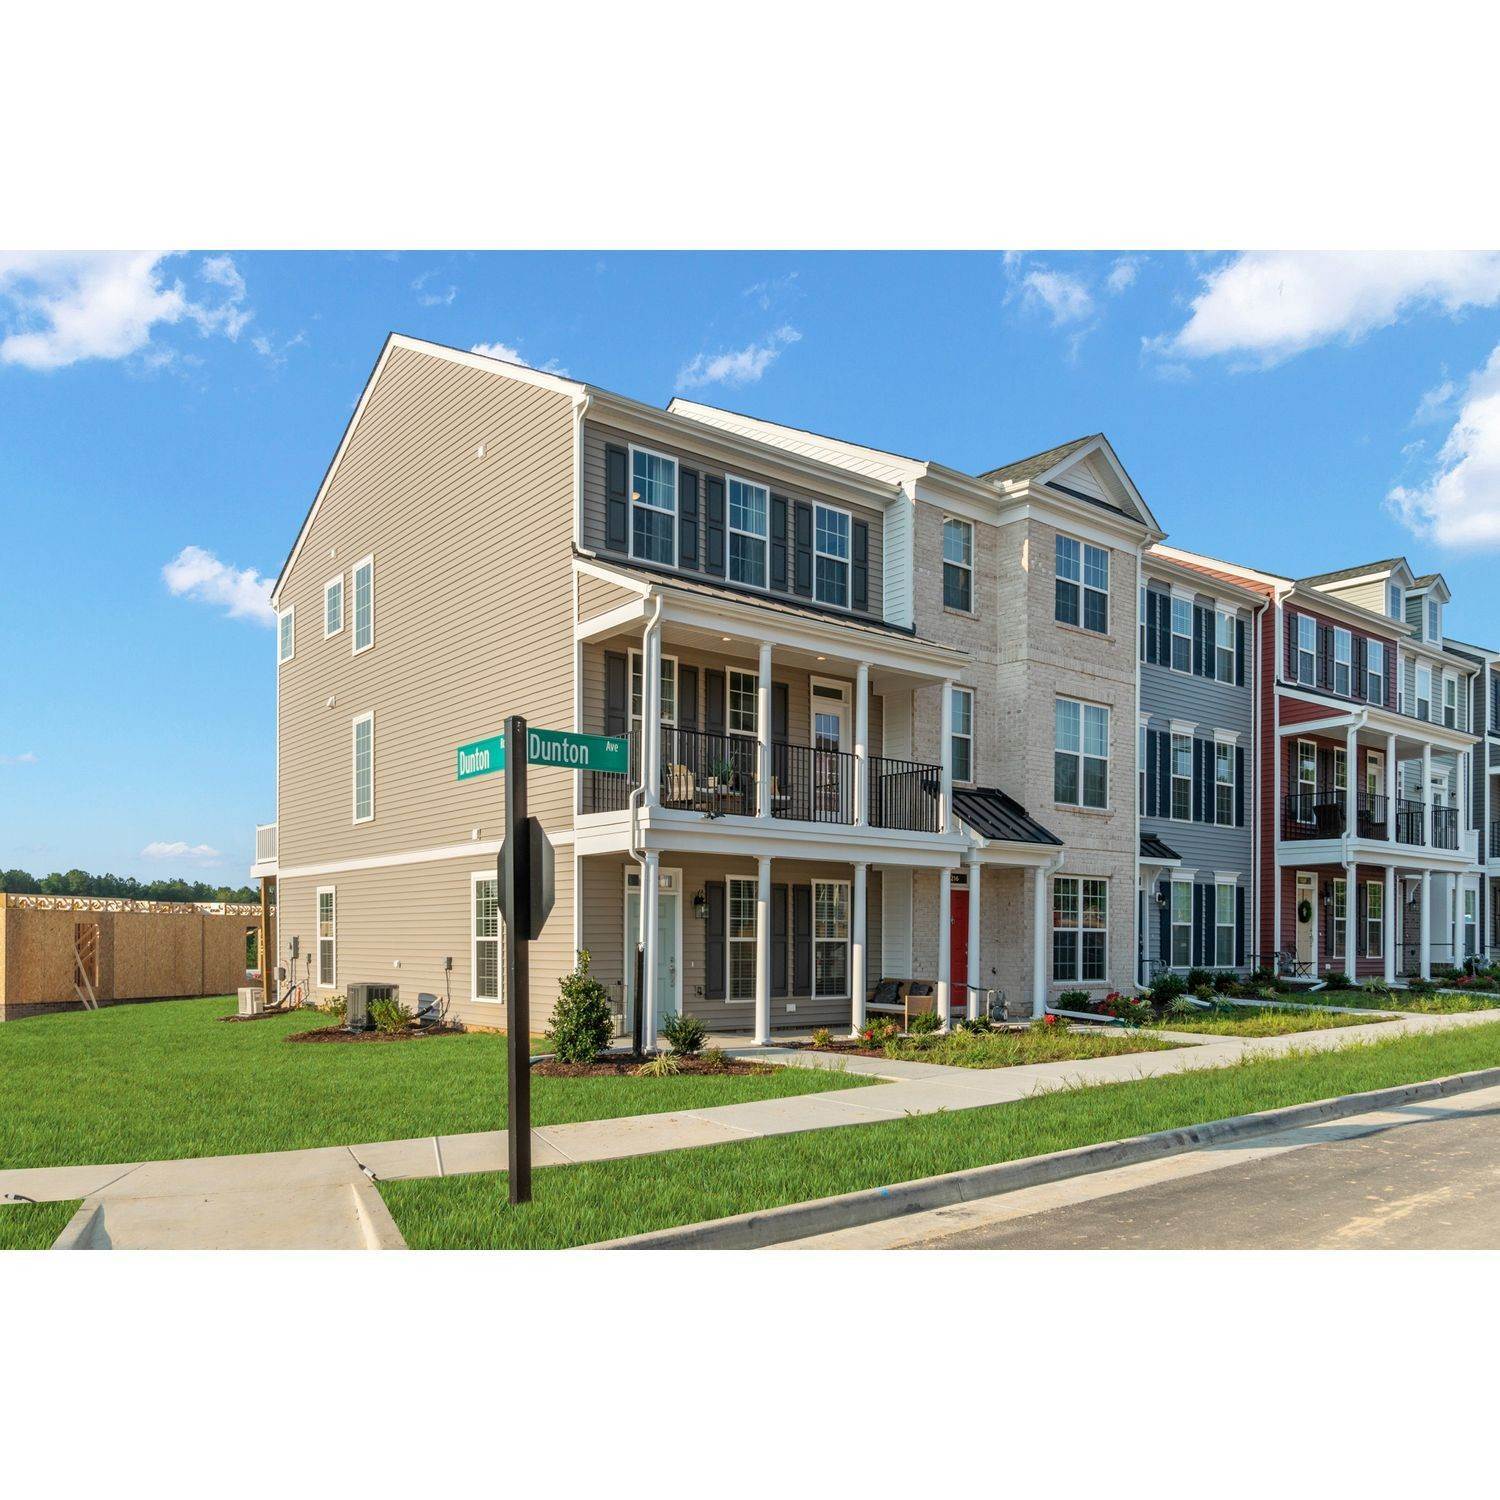 Cosby Village 3-Story Townhomes building at 15220 Dunton Avenue, Chesterfield, VA 23832